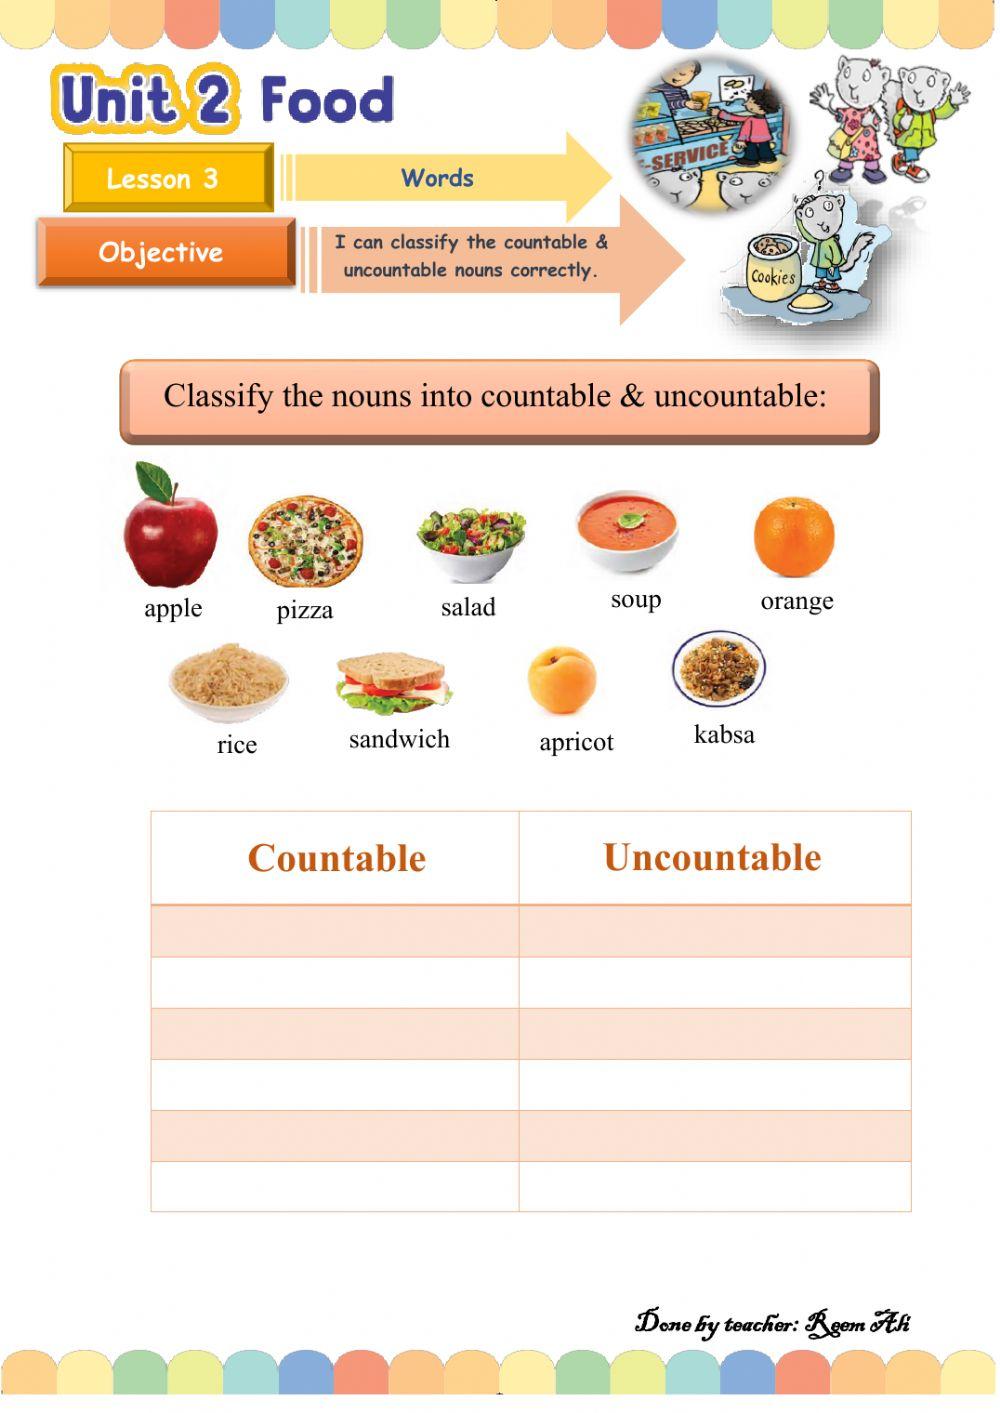 We Can2 L3 : classiclassifying the countable - uncountable nouns correctly.